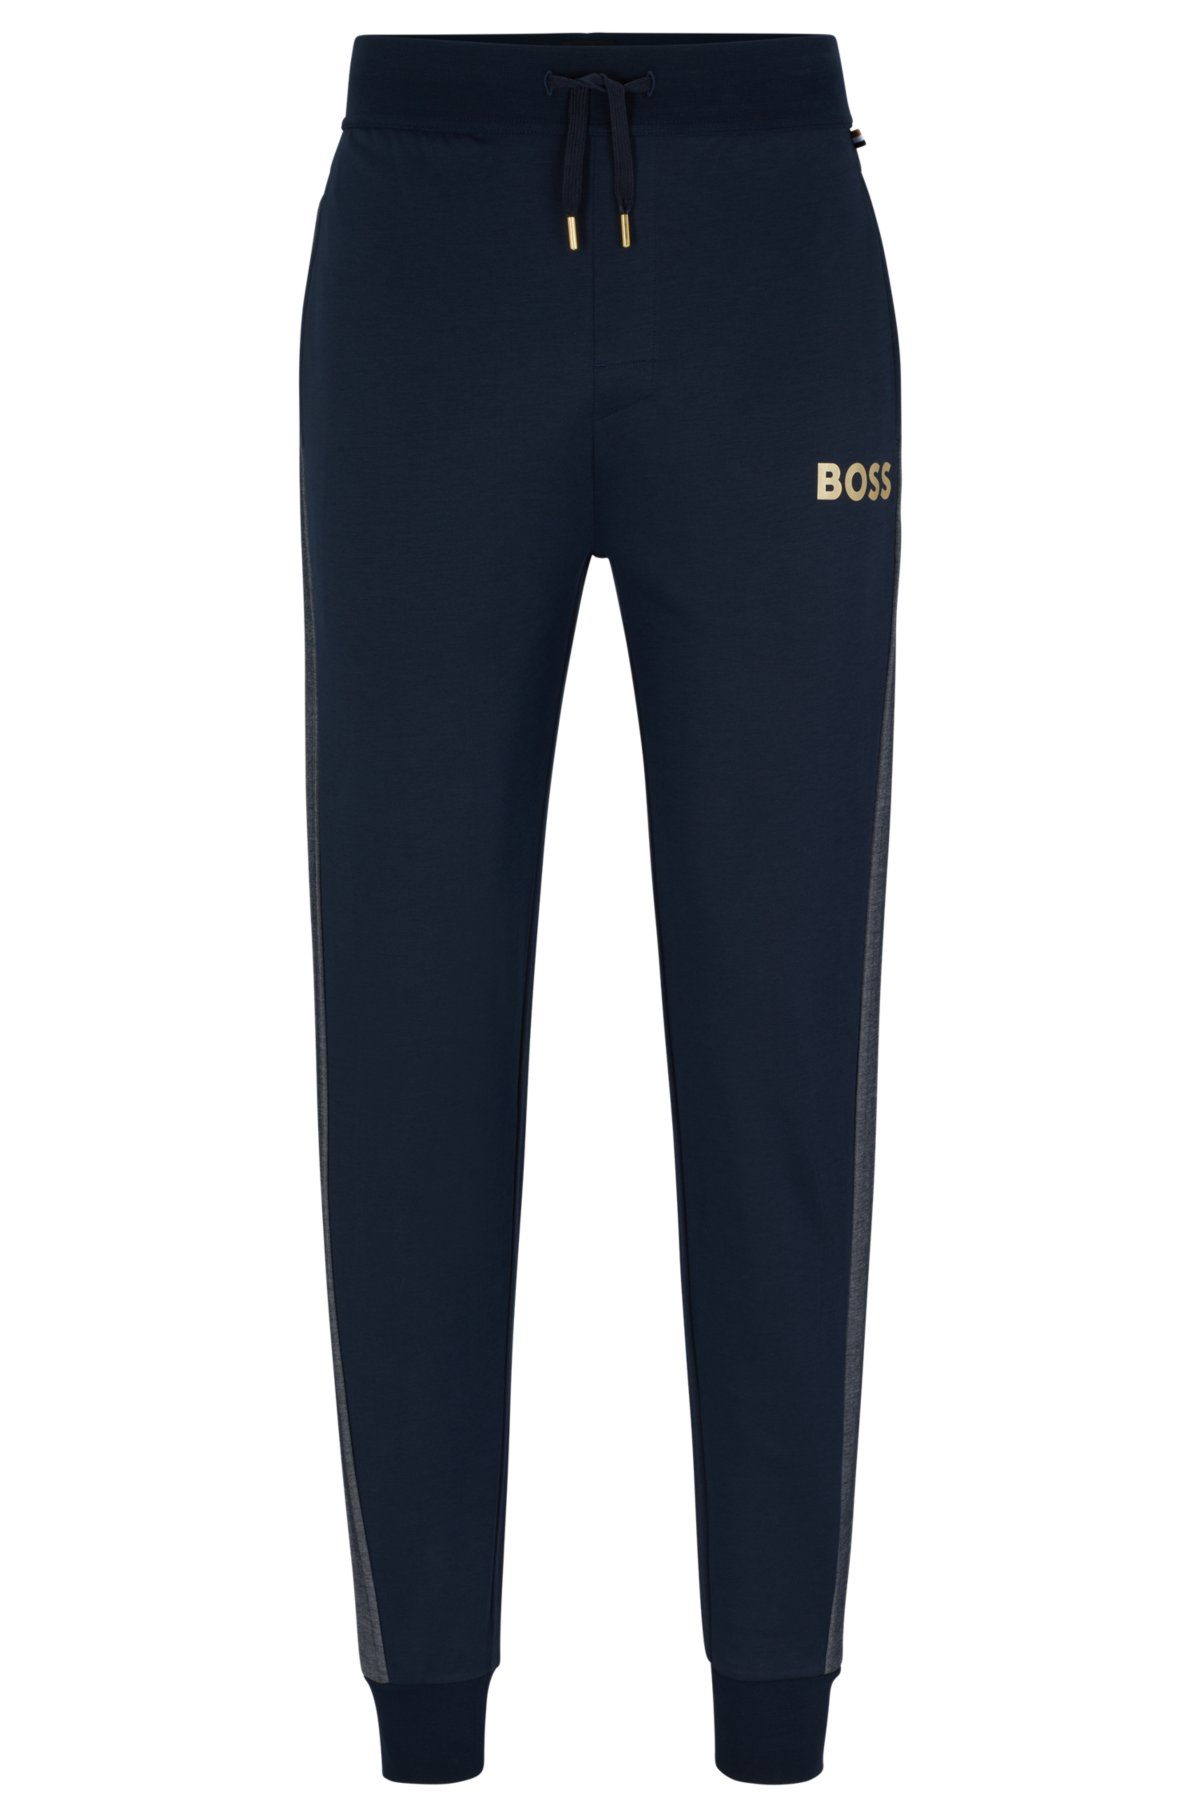 with - Sweatpants embroidered BOSS logo